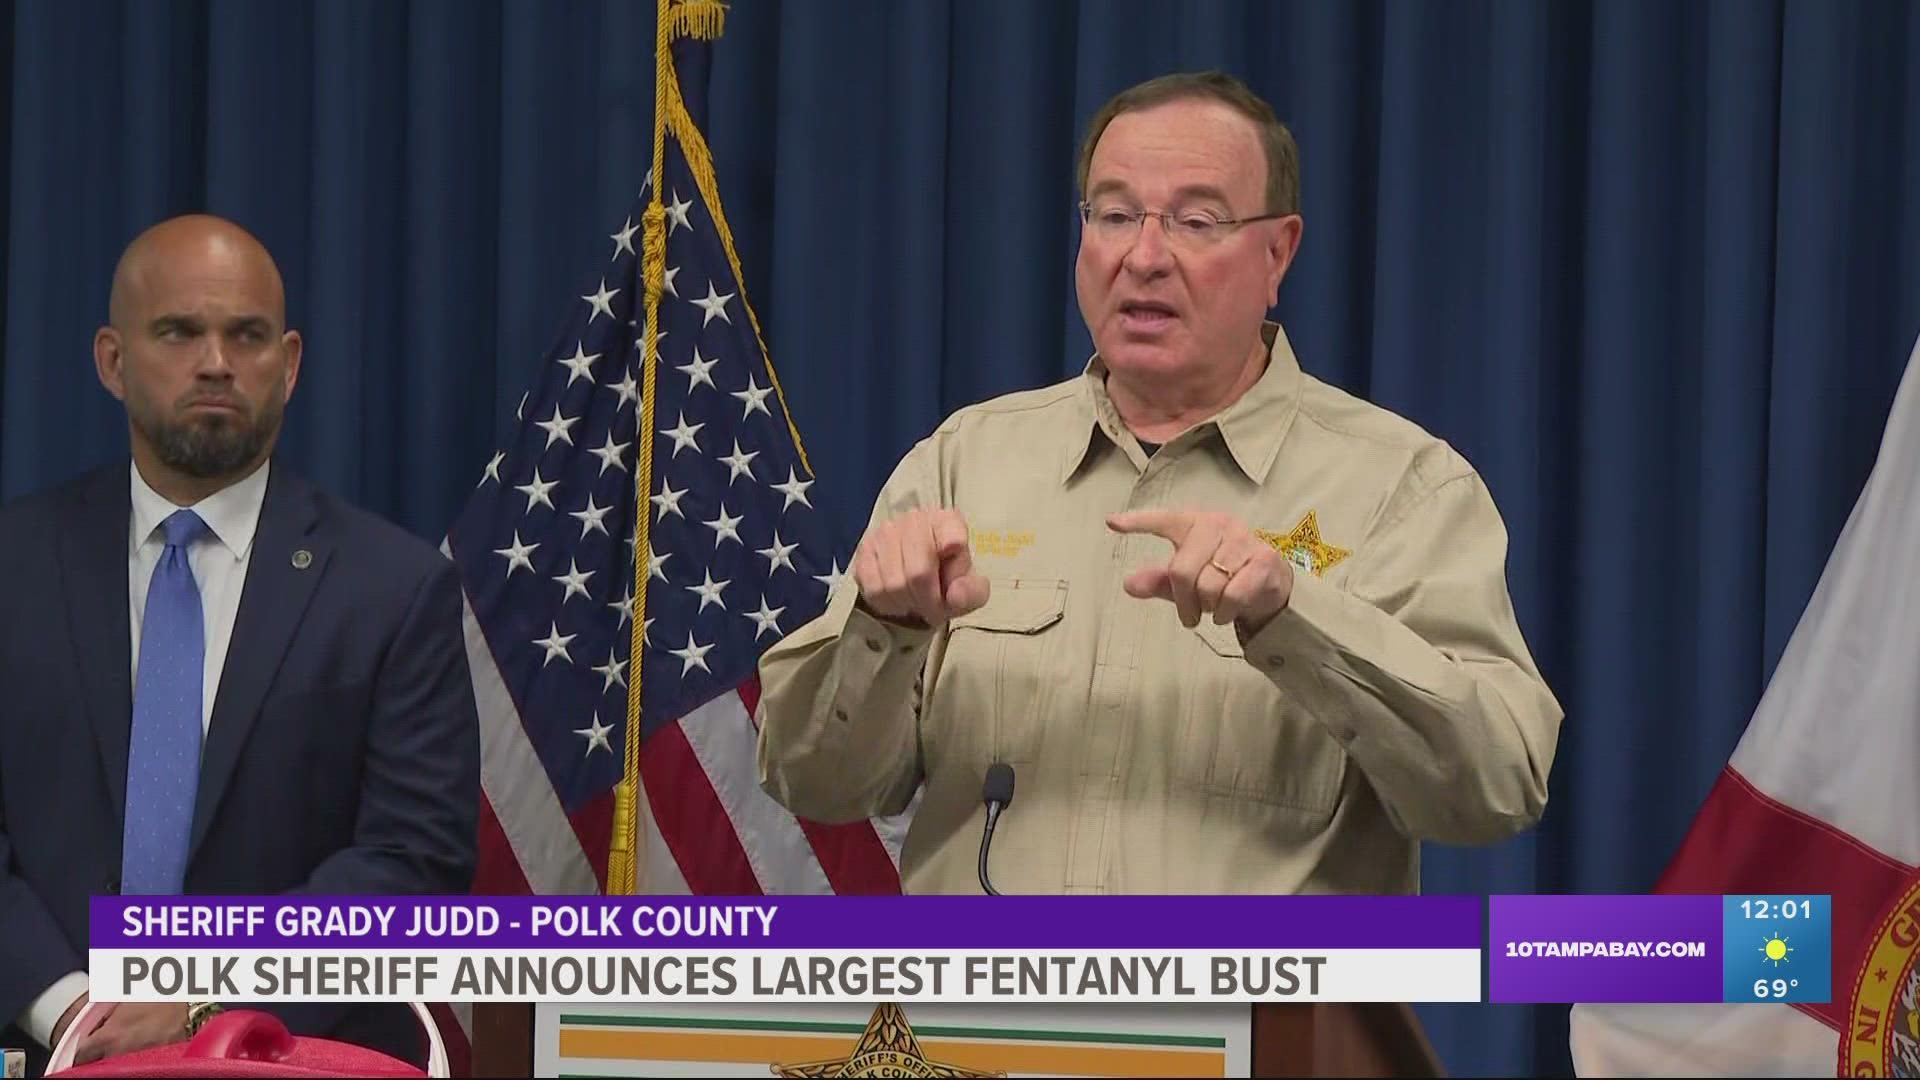 Polk County Sheriff's Office detectives seized more than 11 pounds of fentanyl, enough to kill more than two million people.